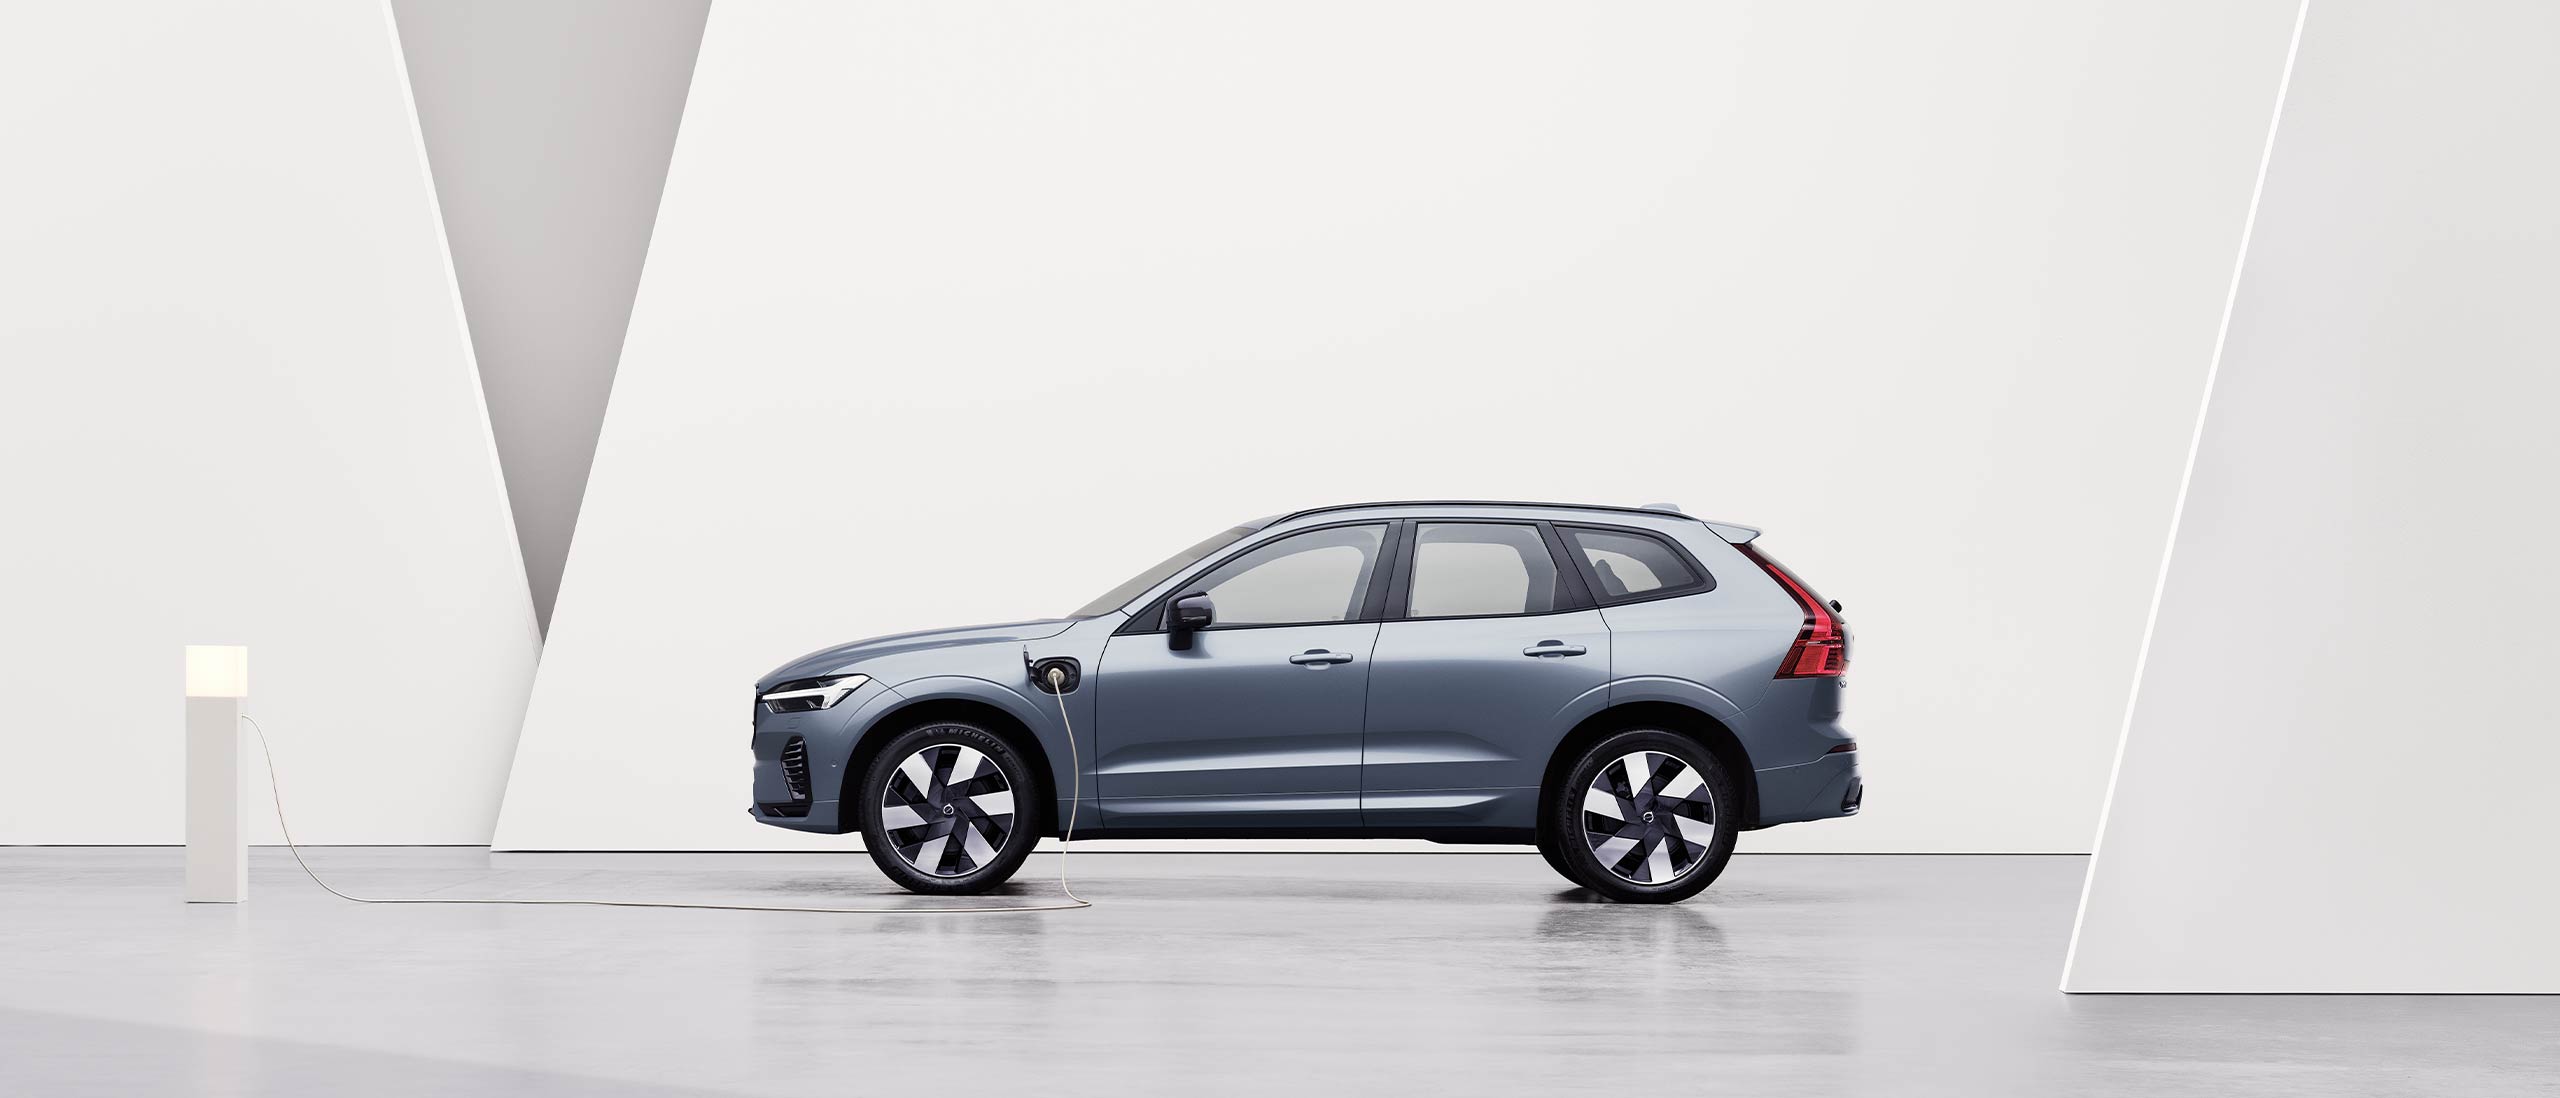 A gray Volvo XC60 Recharge, charging in a white surrounding.